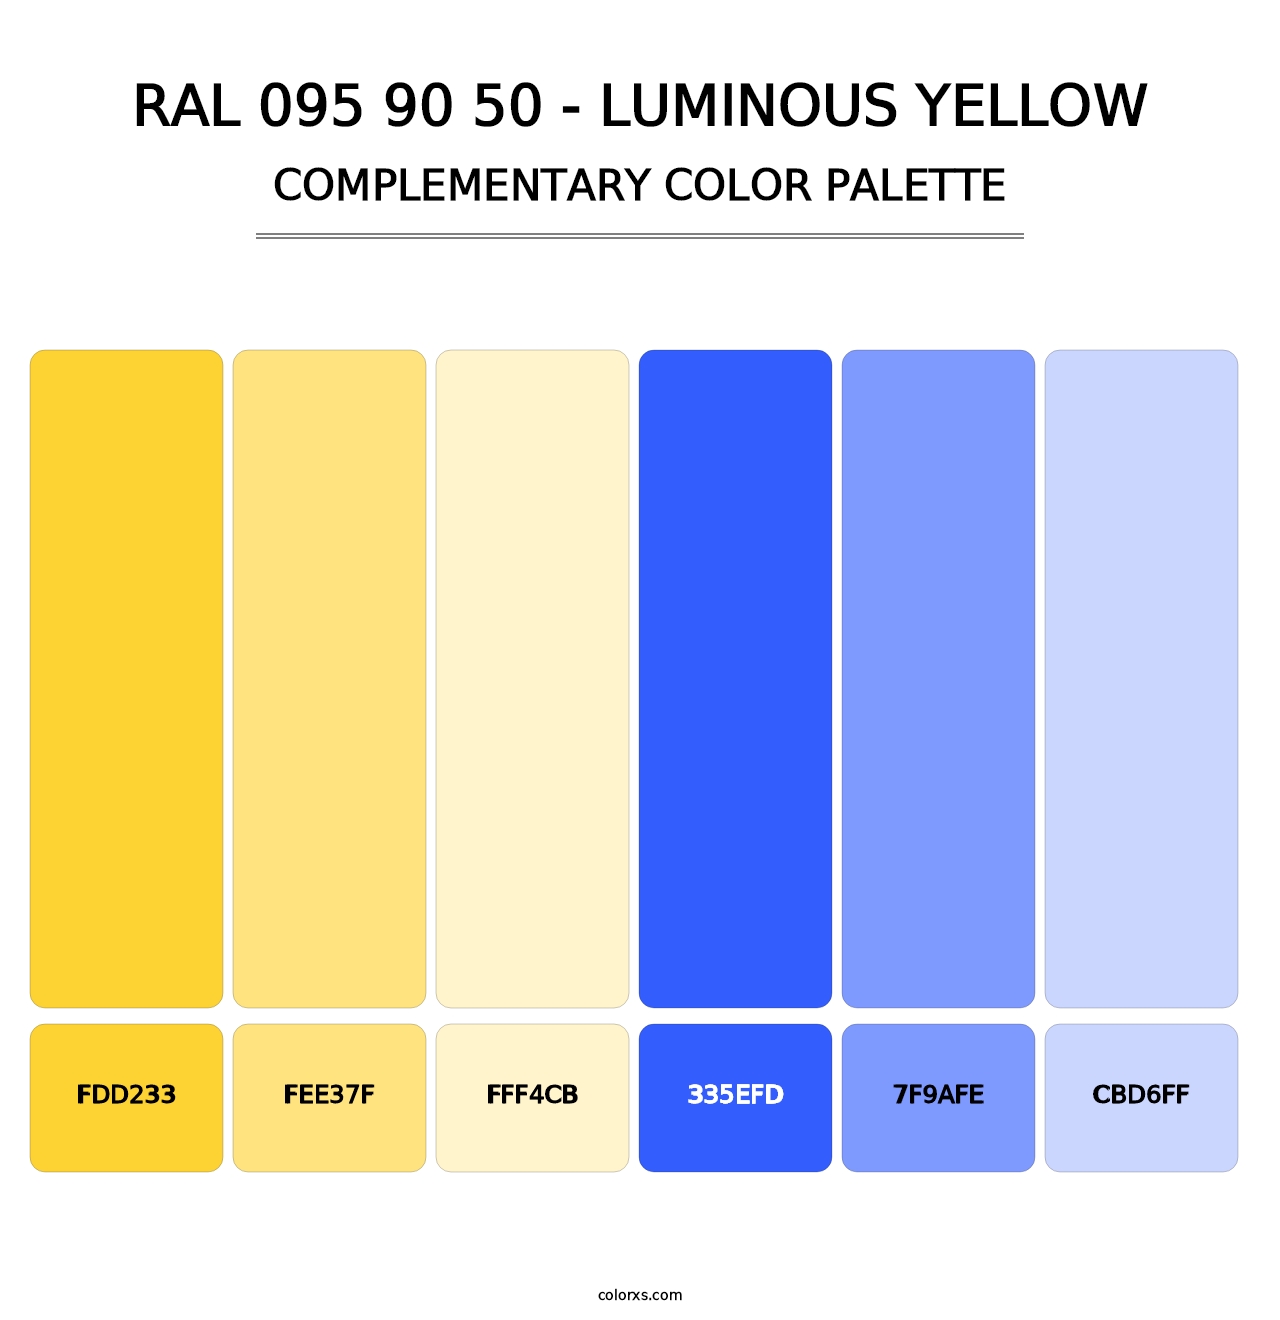 RAL 095 90 50 - Luminous Yellow - Complementary Color Palette